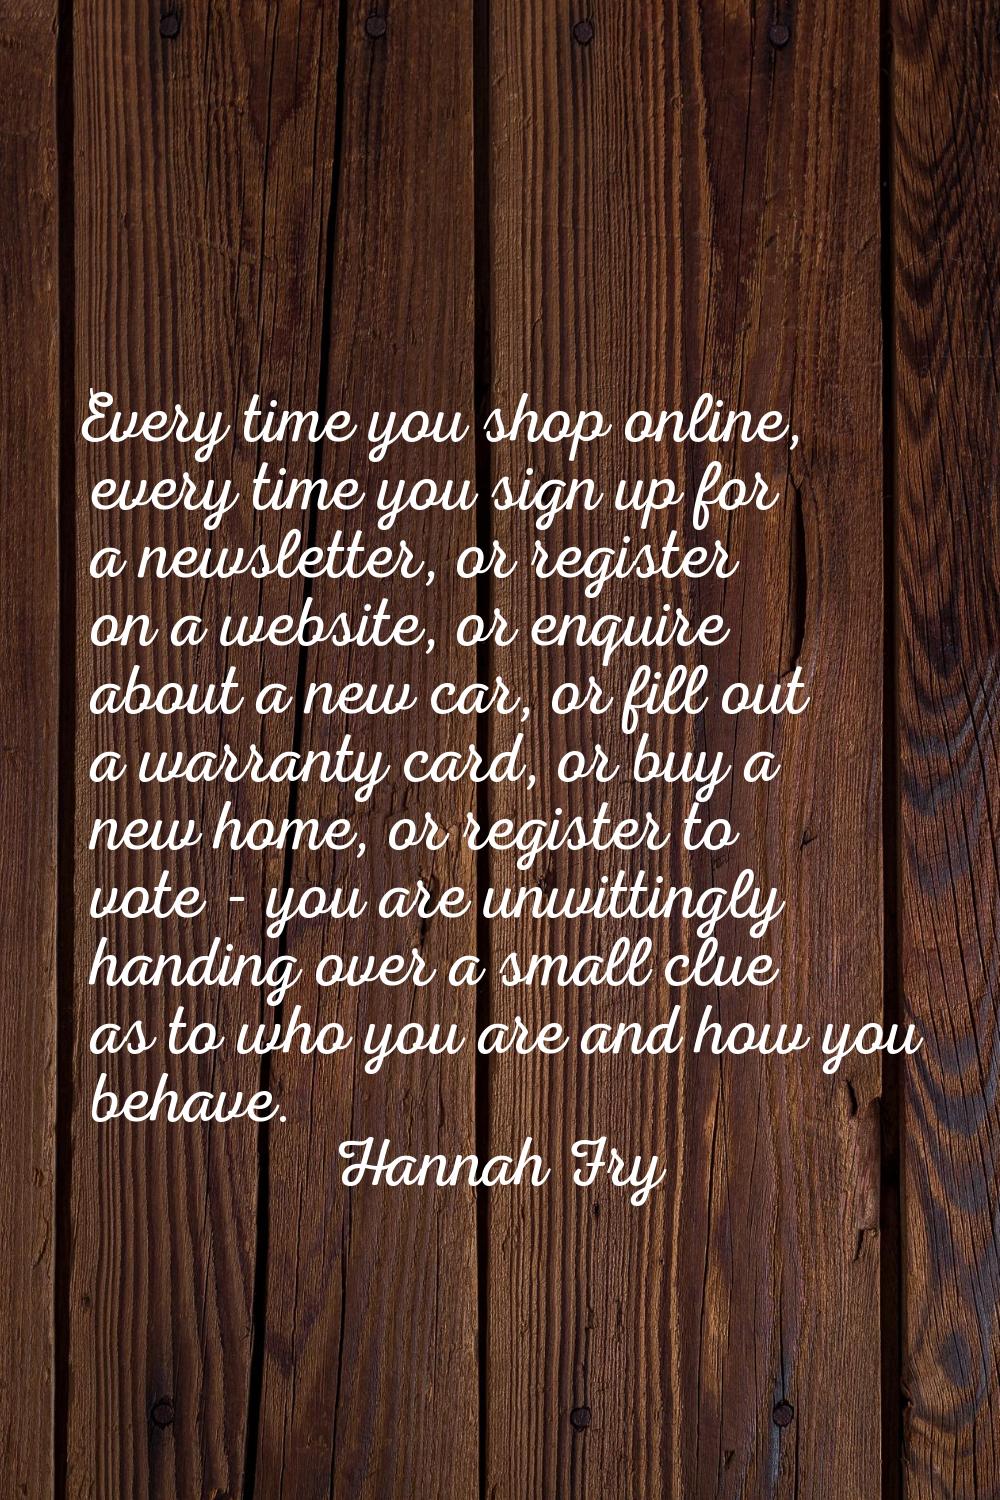 Every time you shop online, every time you sign up for a newsletter, or register on a website, or e